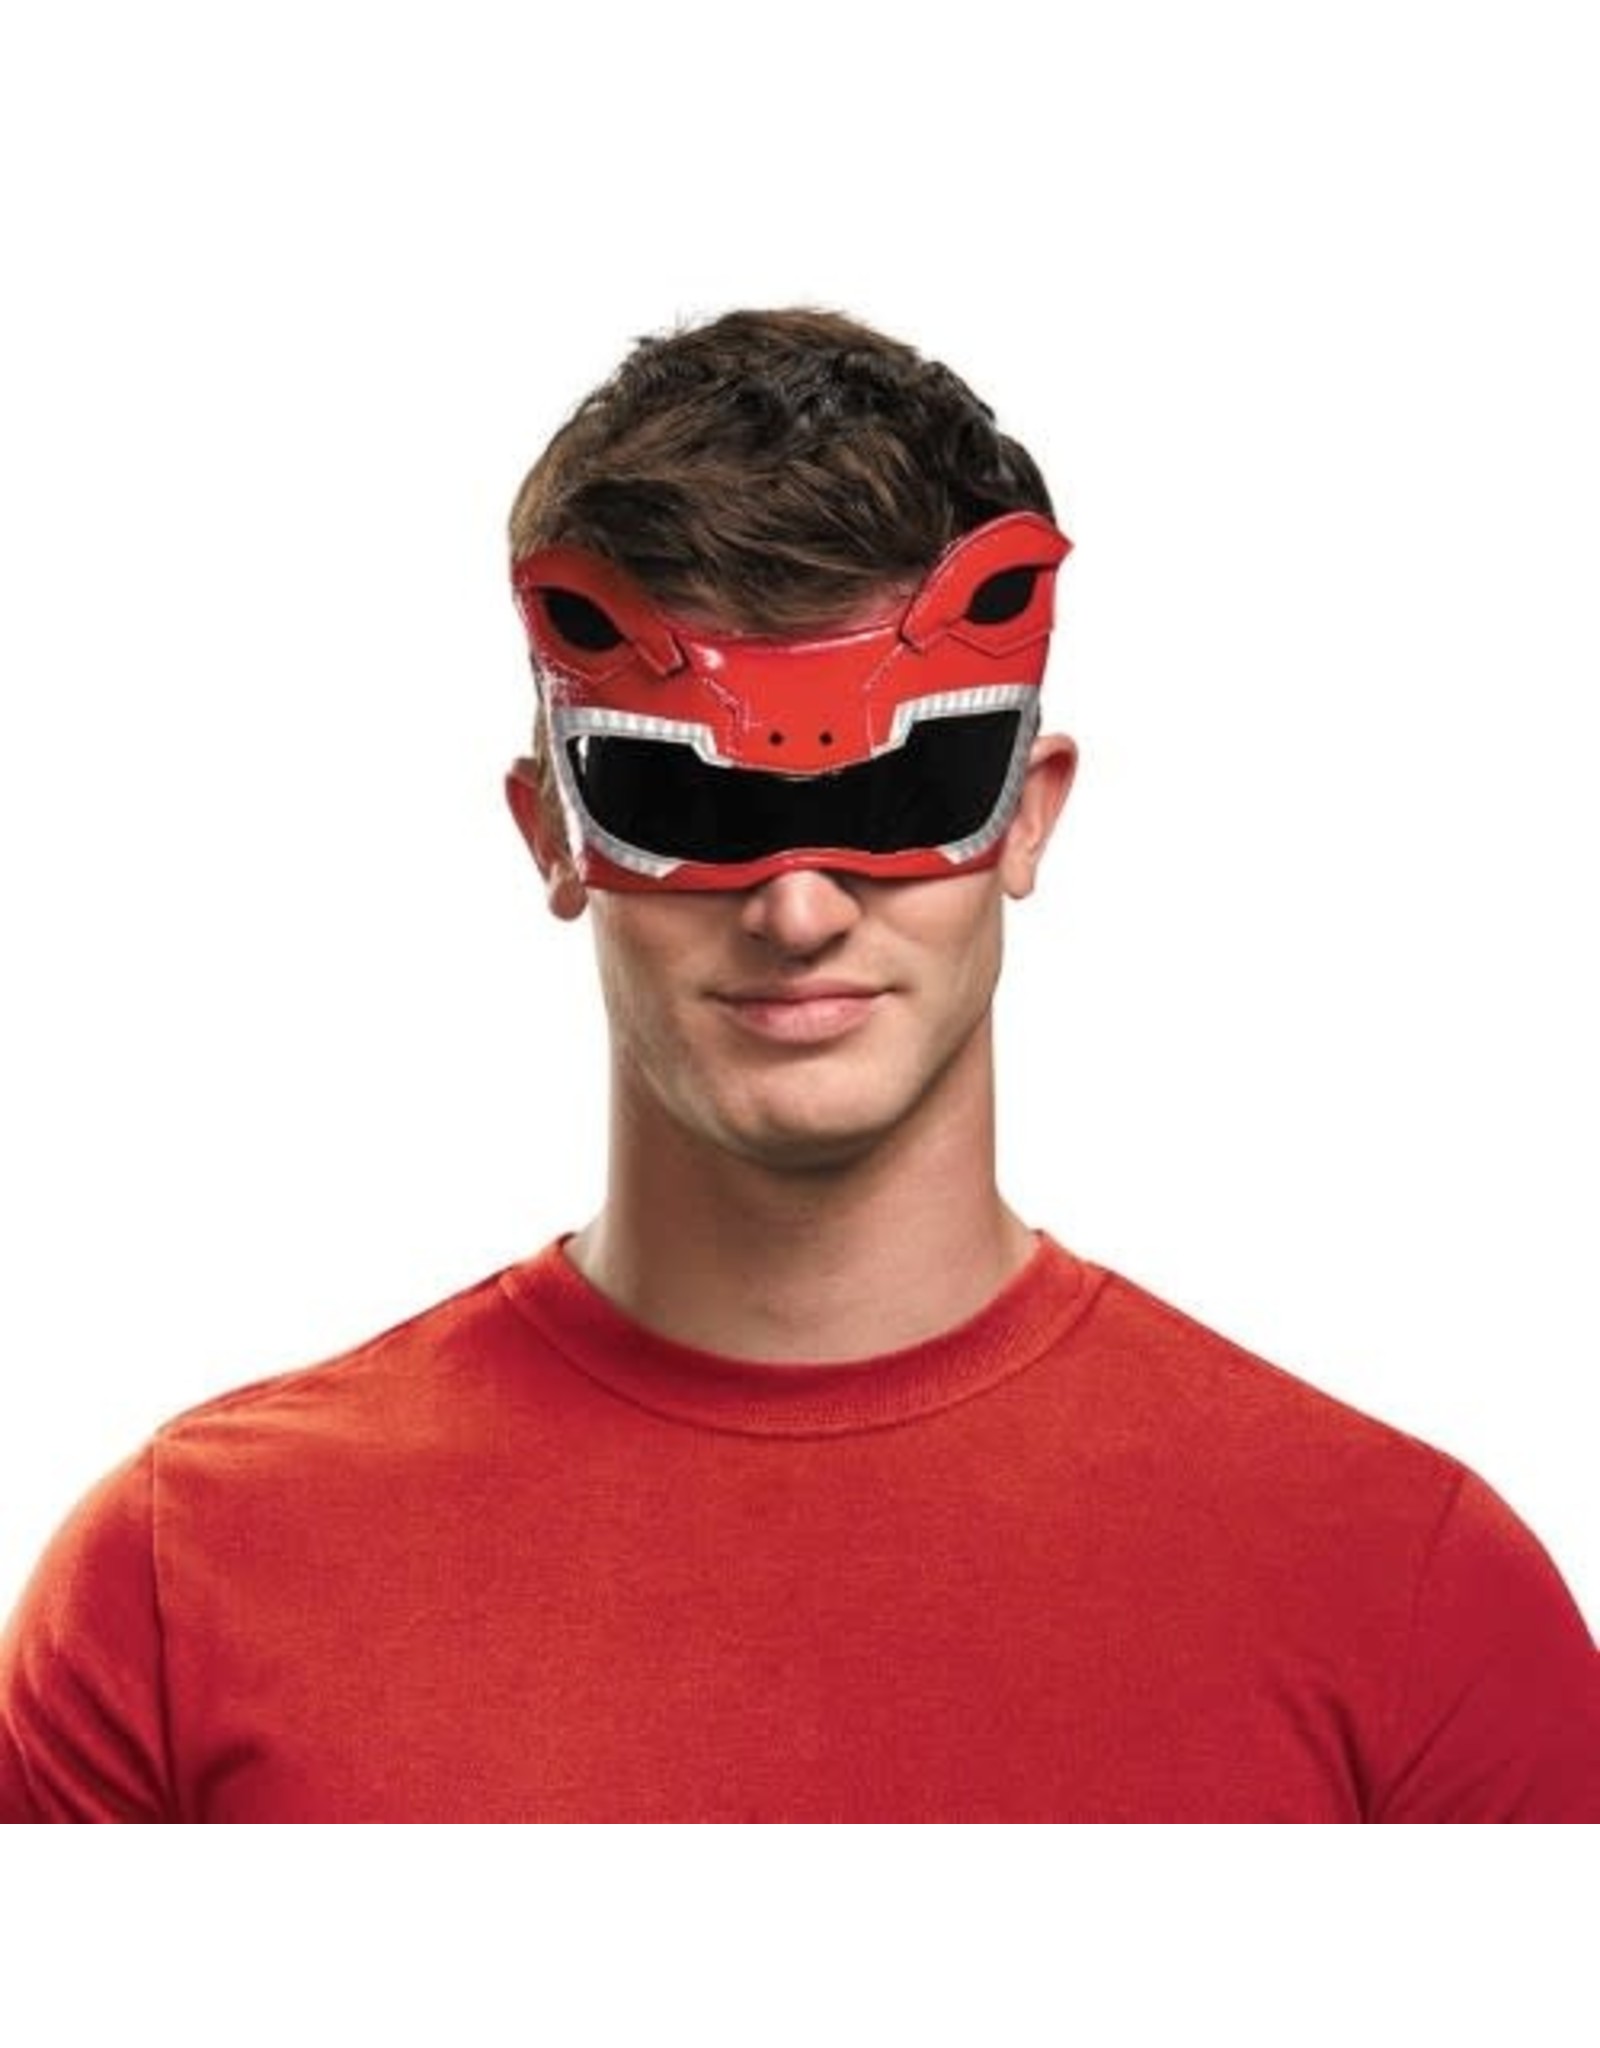 Disguise Inc Red Ranger Eye Mask, Red